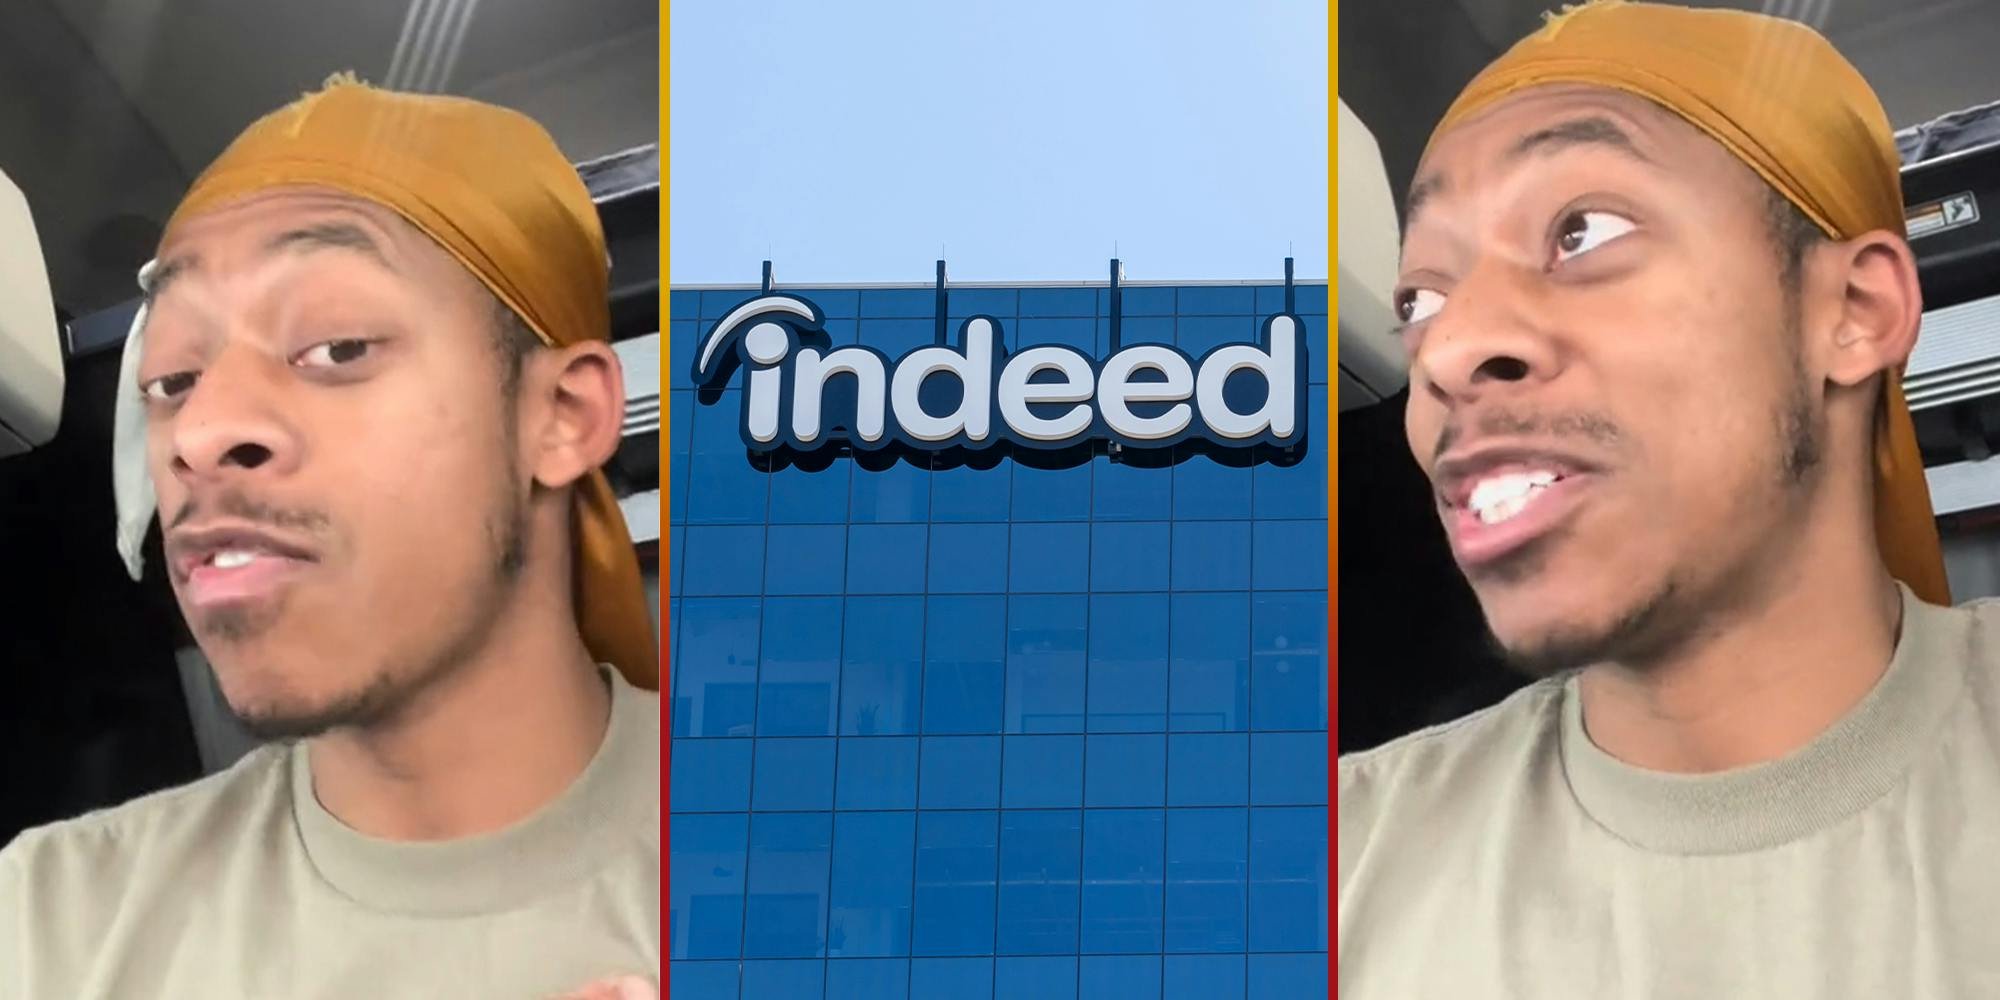 'I confirmed it today': Job seeker says Indeed is a 'scam,' claims app does not turn in job applications. He shares what to do instead